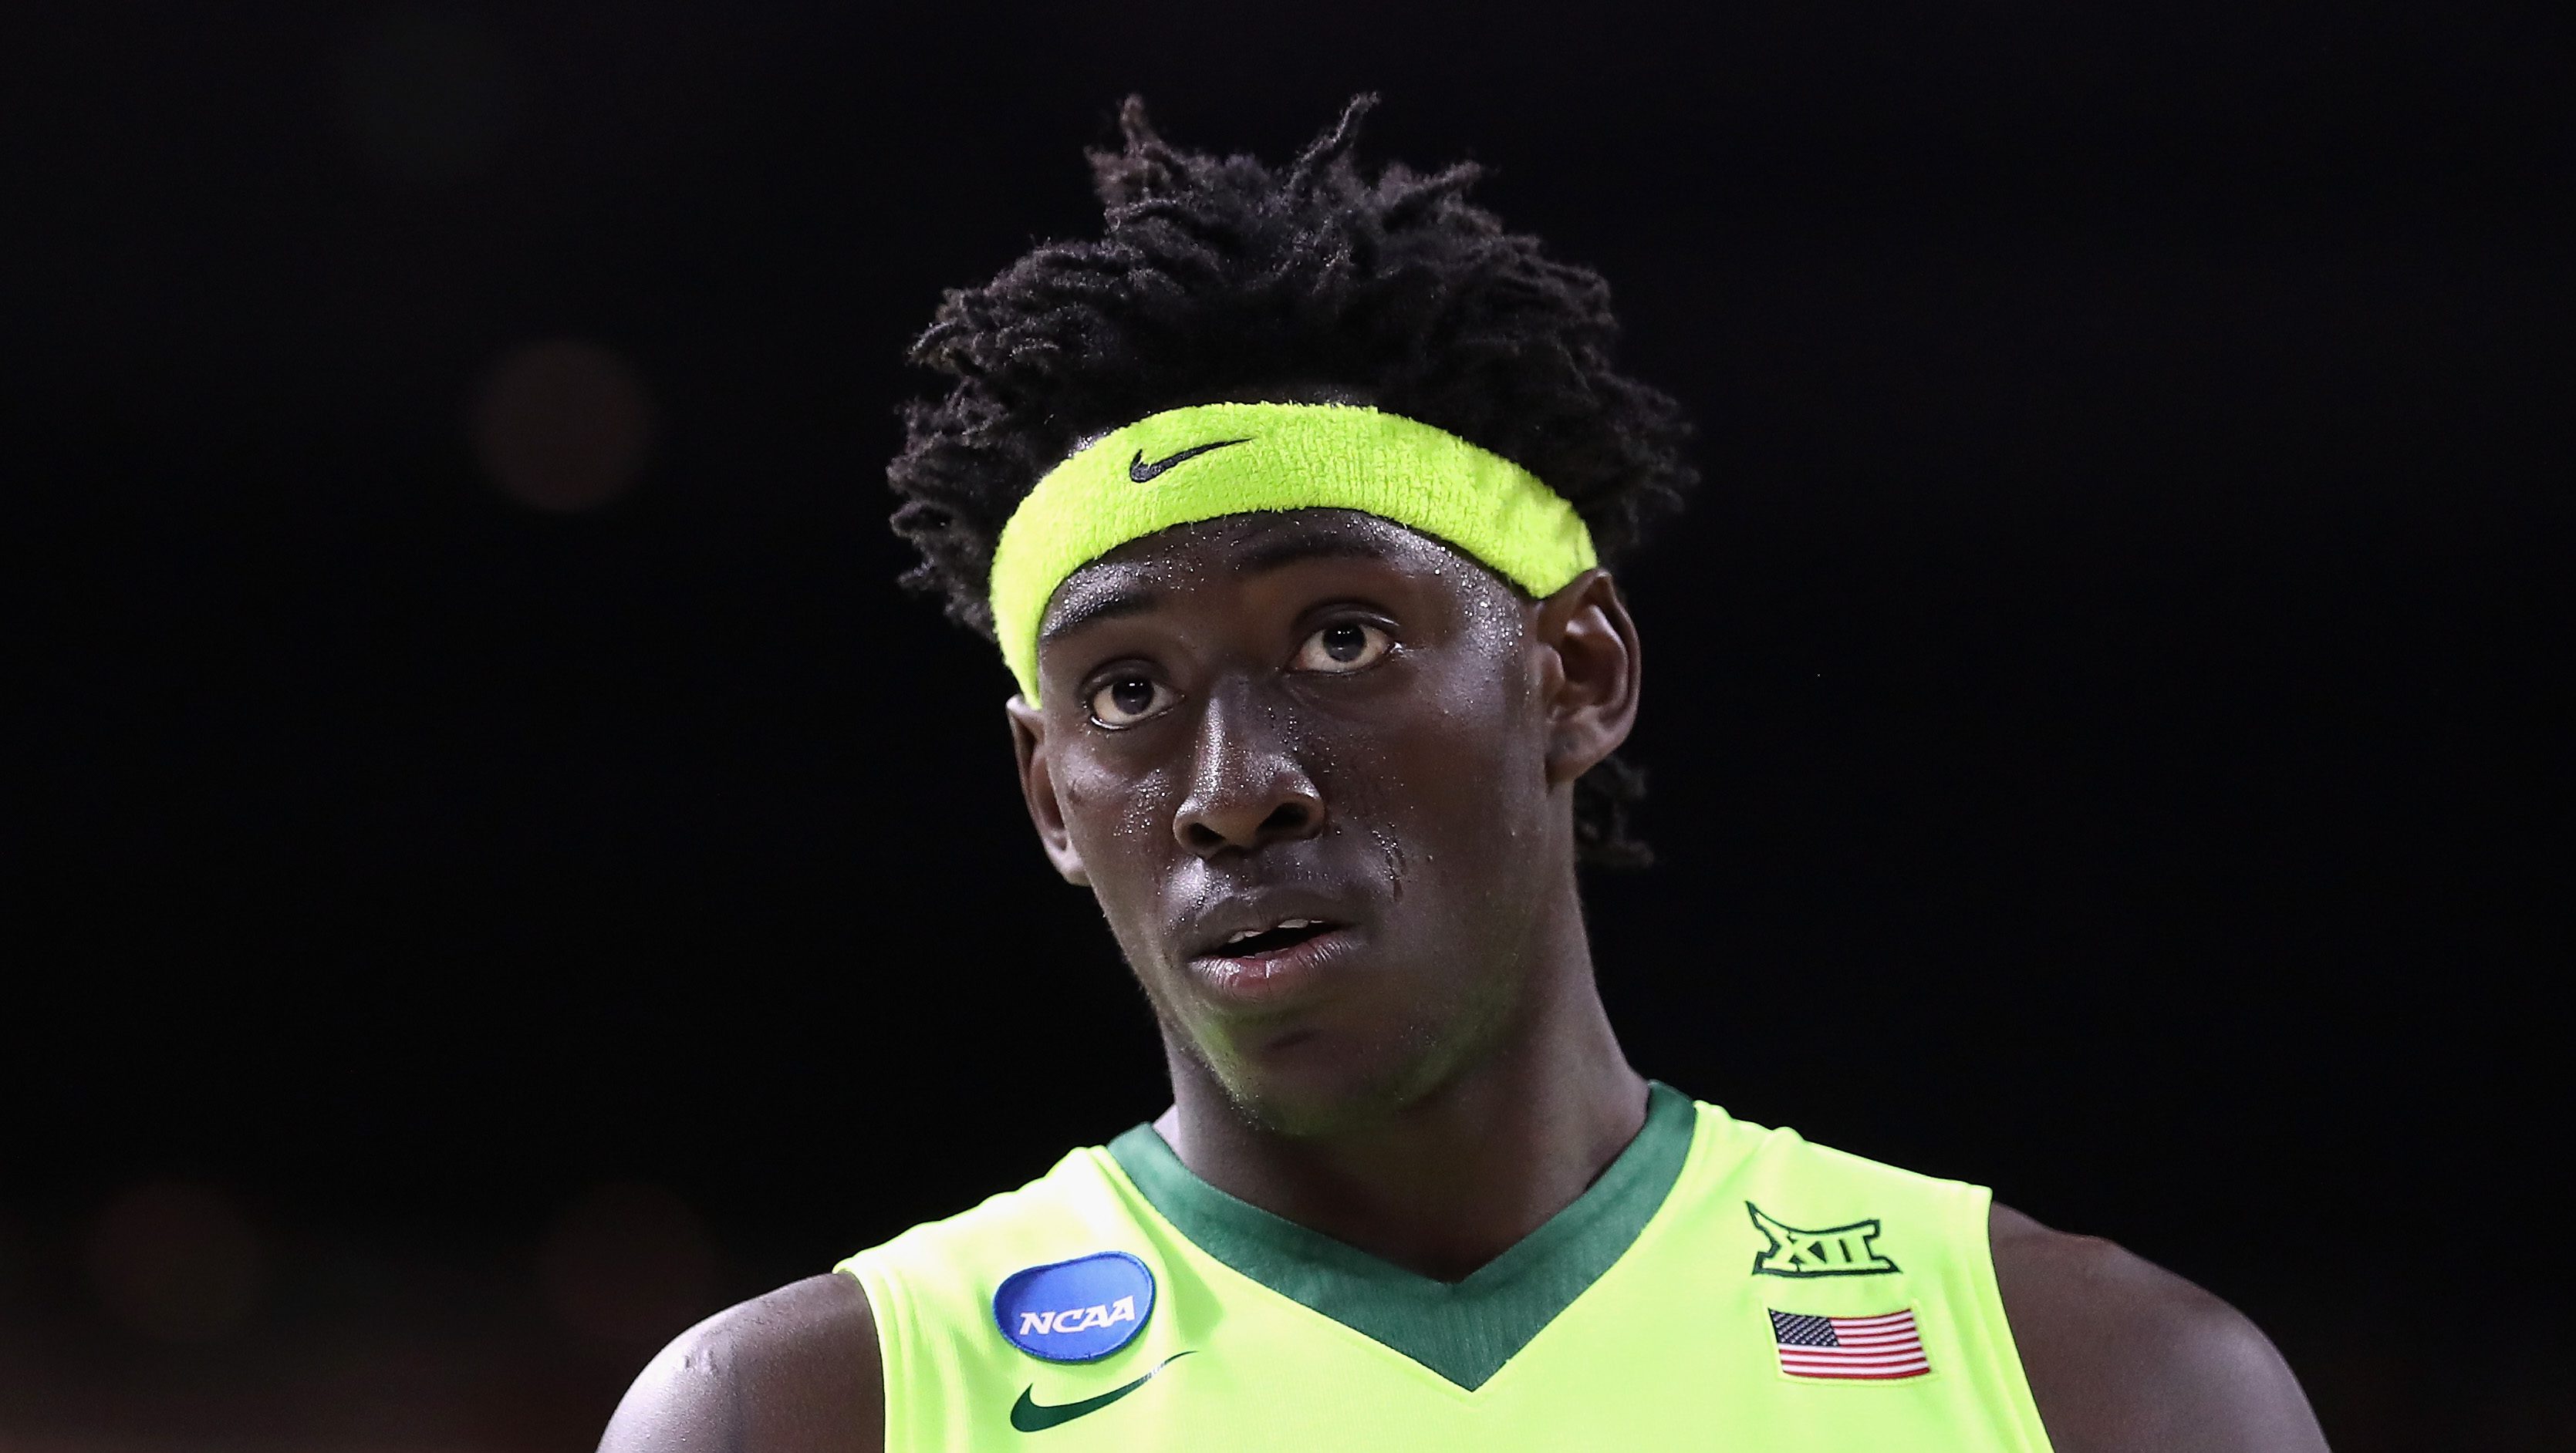 PROVIDENCE, RI - MARCH 17:  Johnathan Motley #5 of the Baylor Bears looks on in the second half against the Yale Bulldogs during the first round of the 2016 NCAA Men's Basketball Tournament at Dunkin' Donuts Center on March 17, 2016 in Providence, Rhode Island.  (Photo by Maddie Meyer/Getty Images)